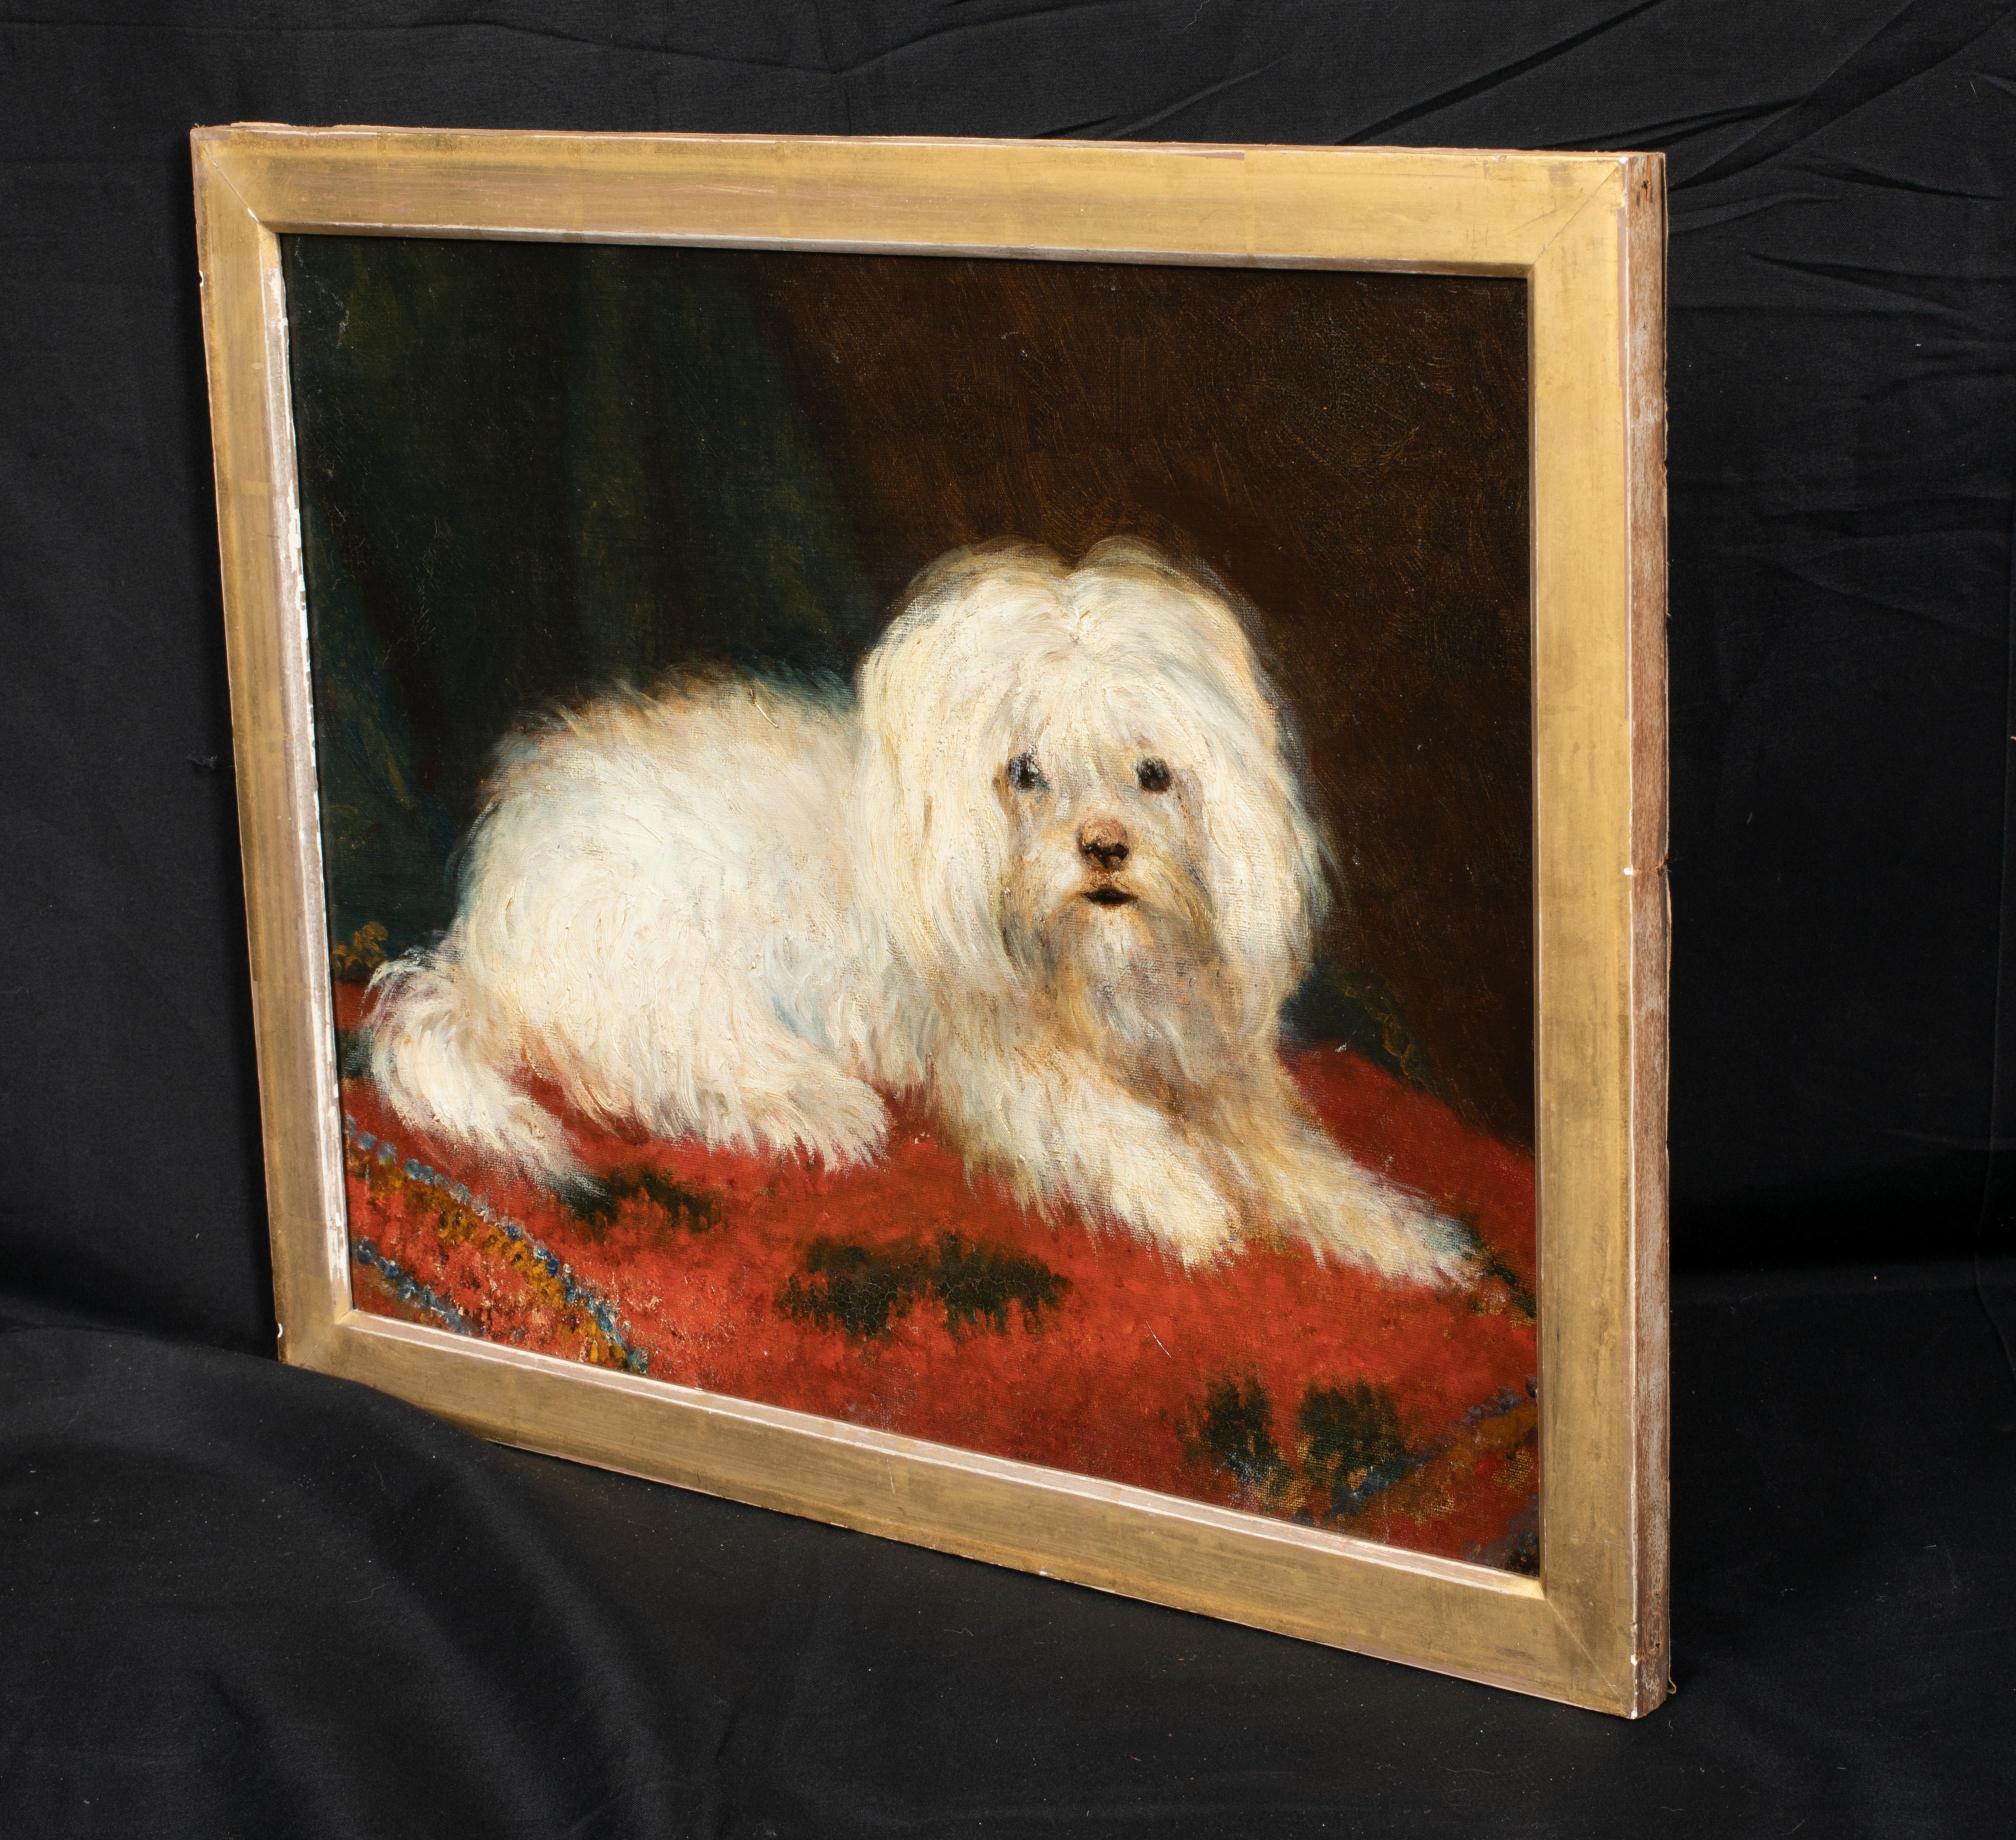 Portrait Of A Maltese, 19th Century 

European School

19th century European School portrait of a Maltese, oil on laid to board. Good qualityy and condition rare early depiction of the breed lying on a red rug. Framed. 

Measurements: 20.5